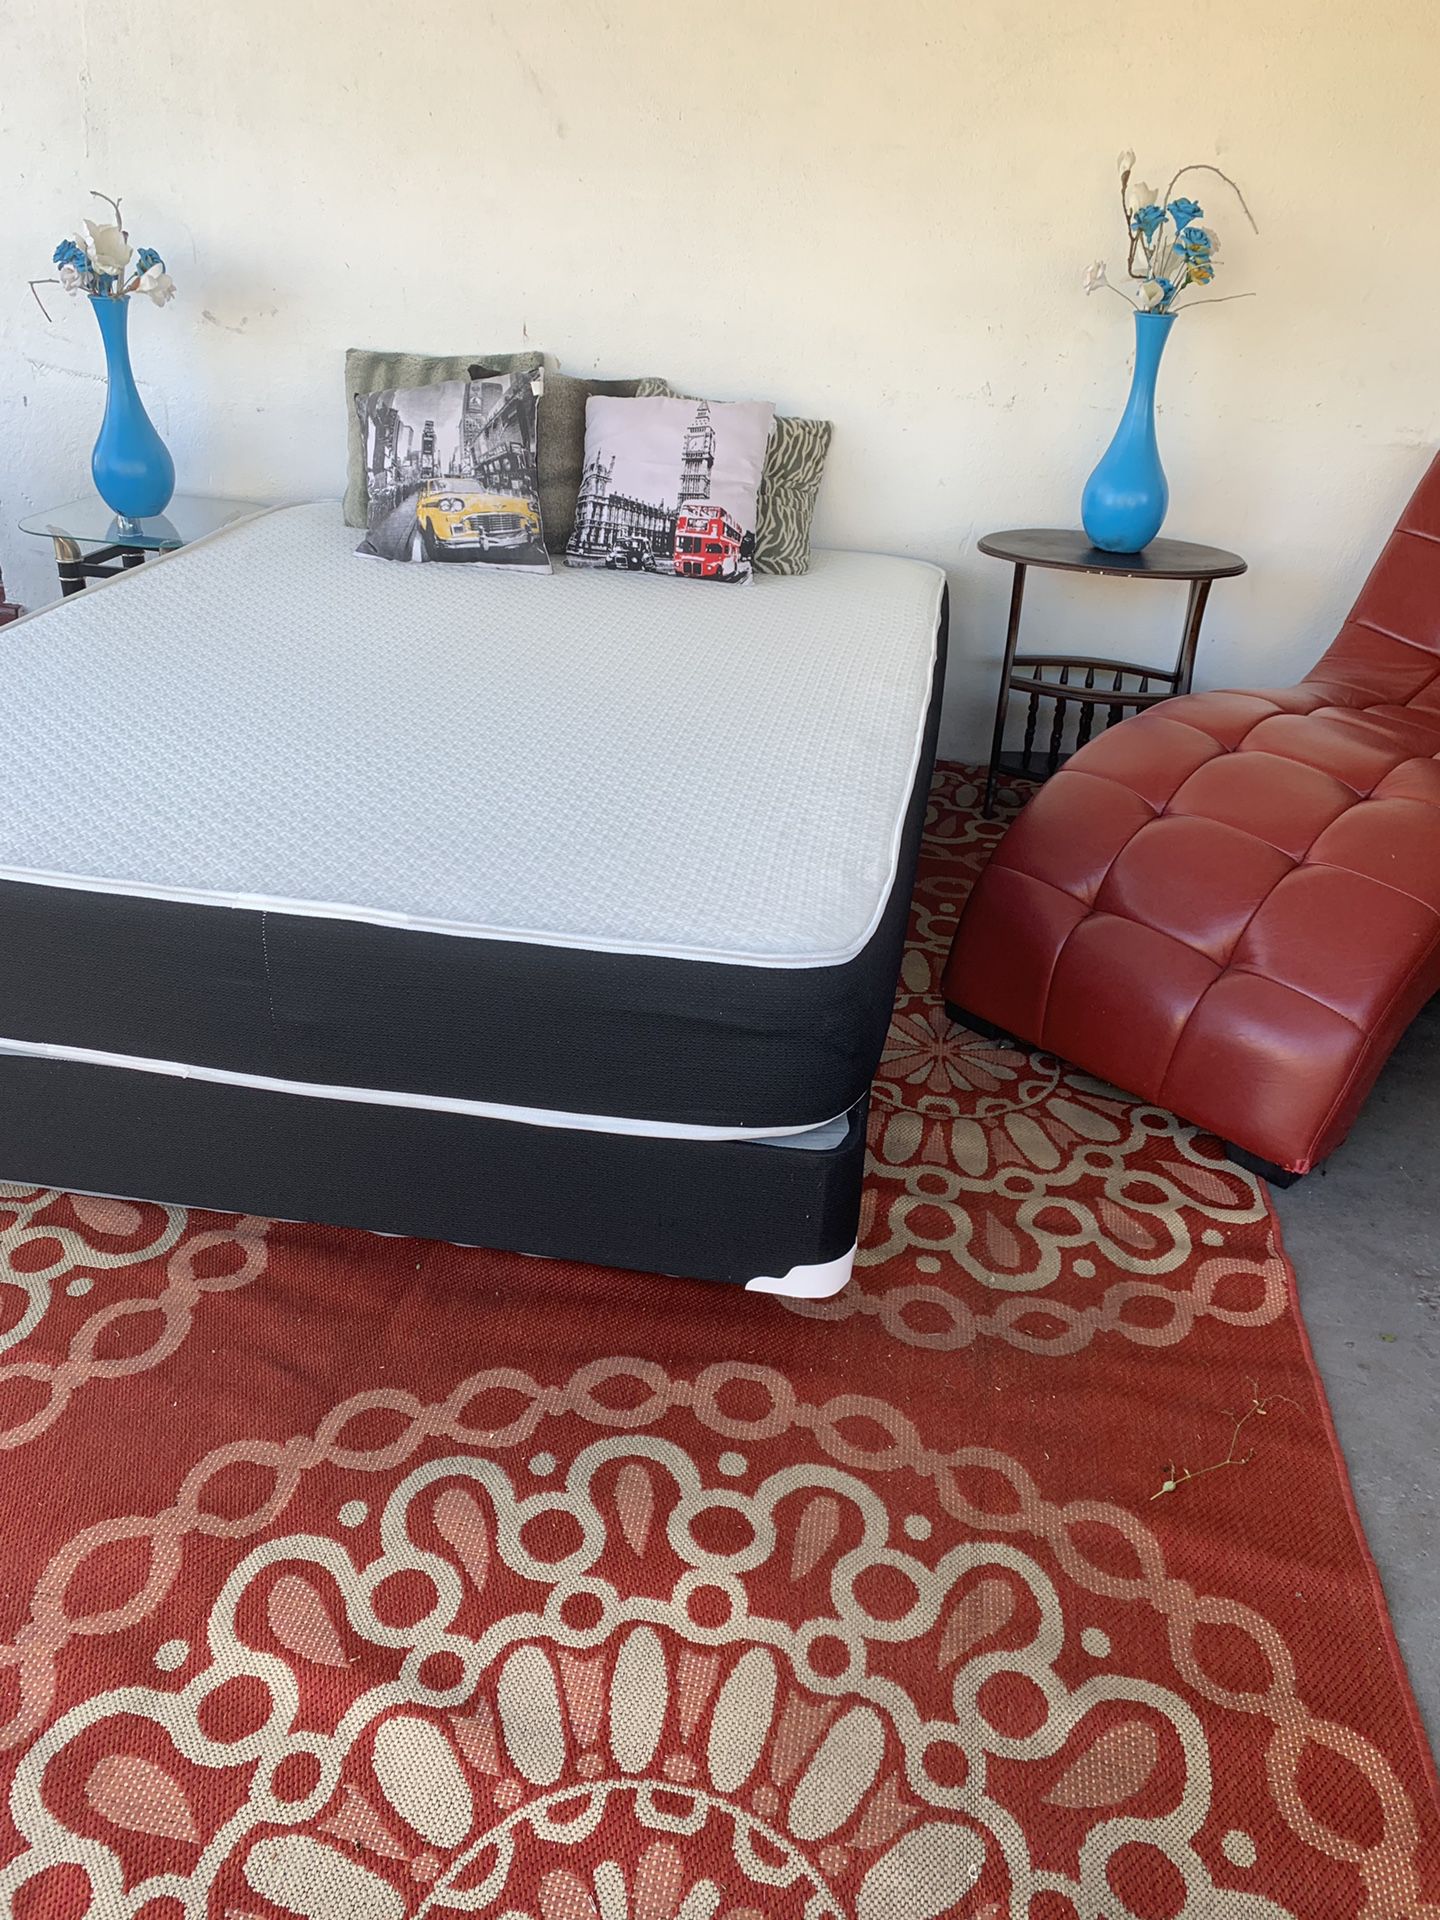 NEW FULL SIDE MATTRESS NEW WITH BOX SPRING